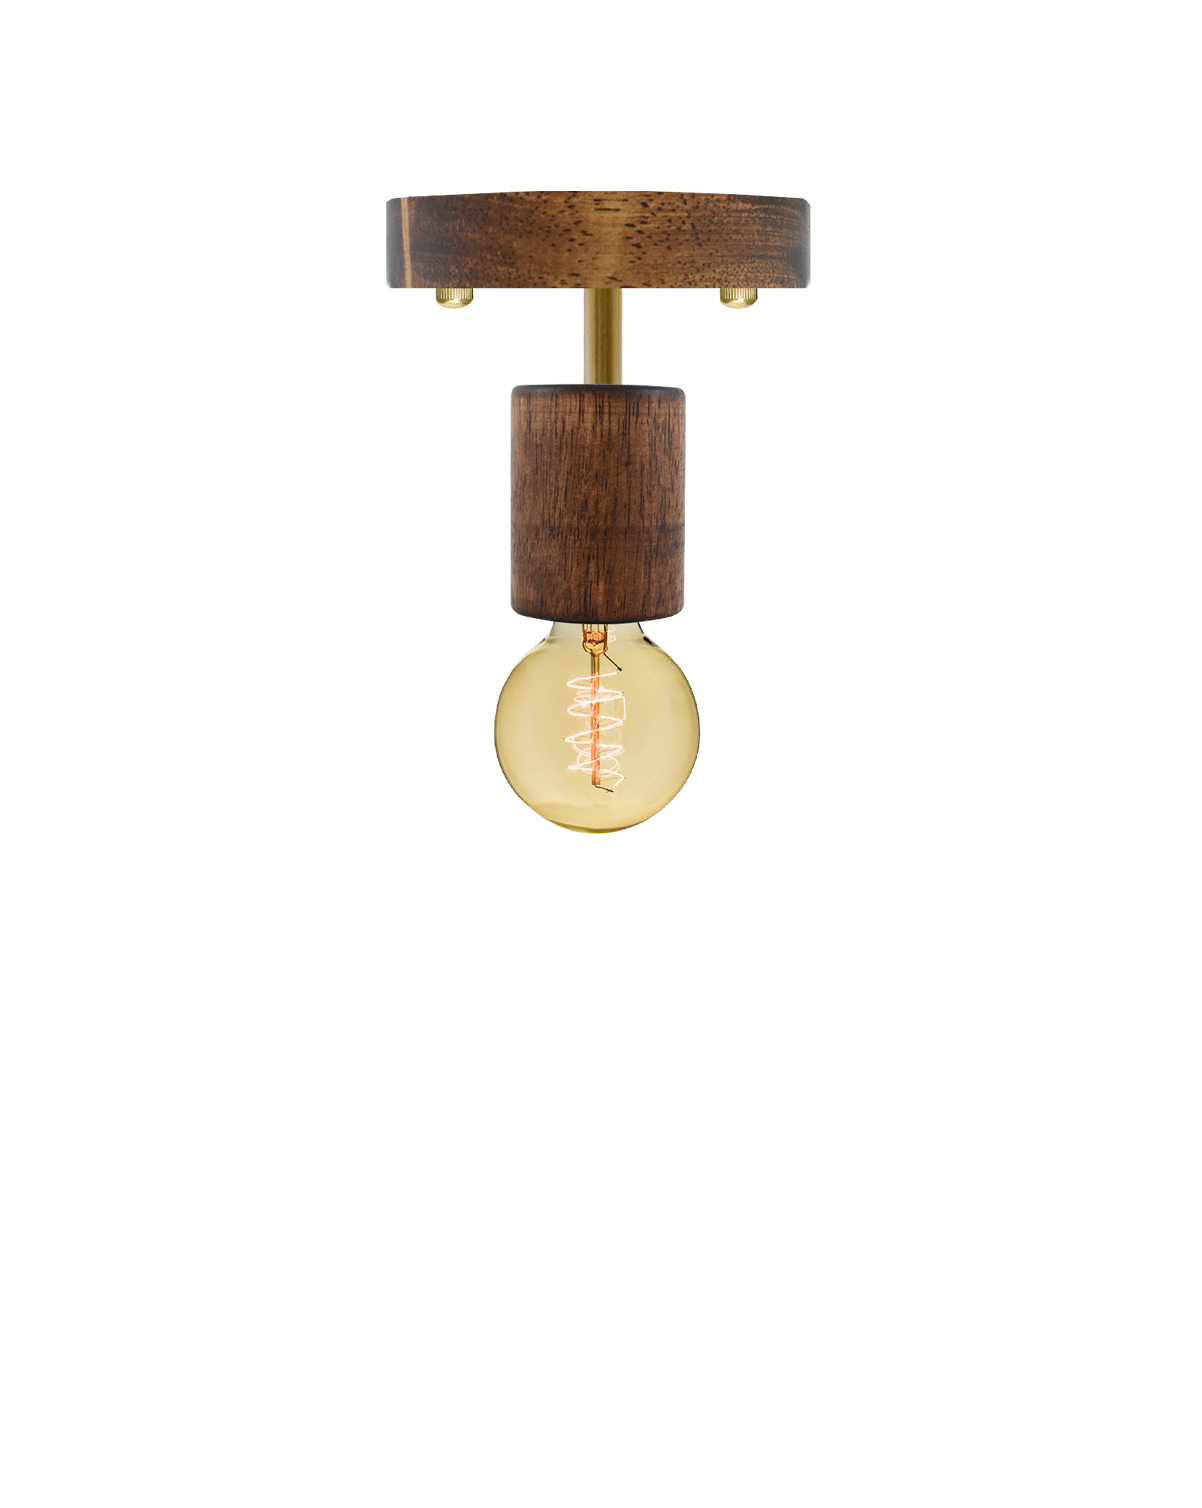 Semi-flush mount light fixture with a walnut wood base, brass stem, and an exposed bulb.